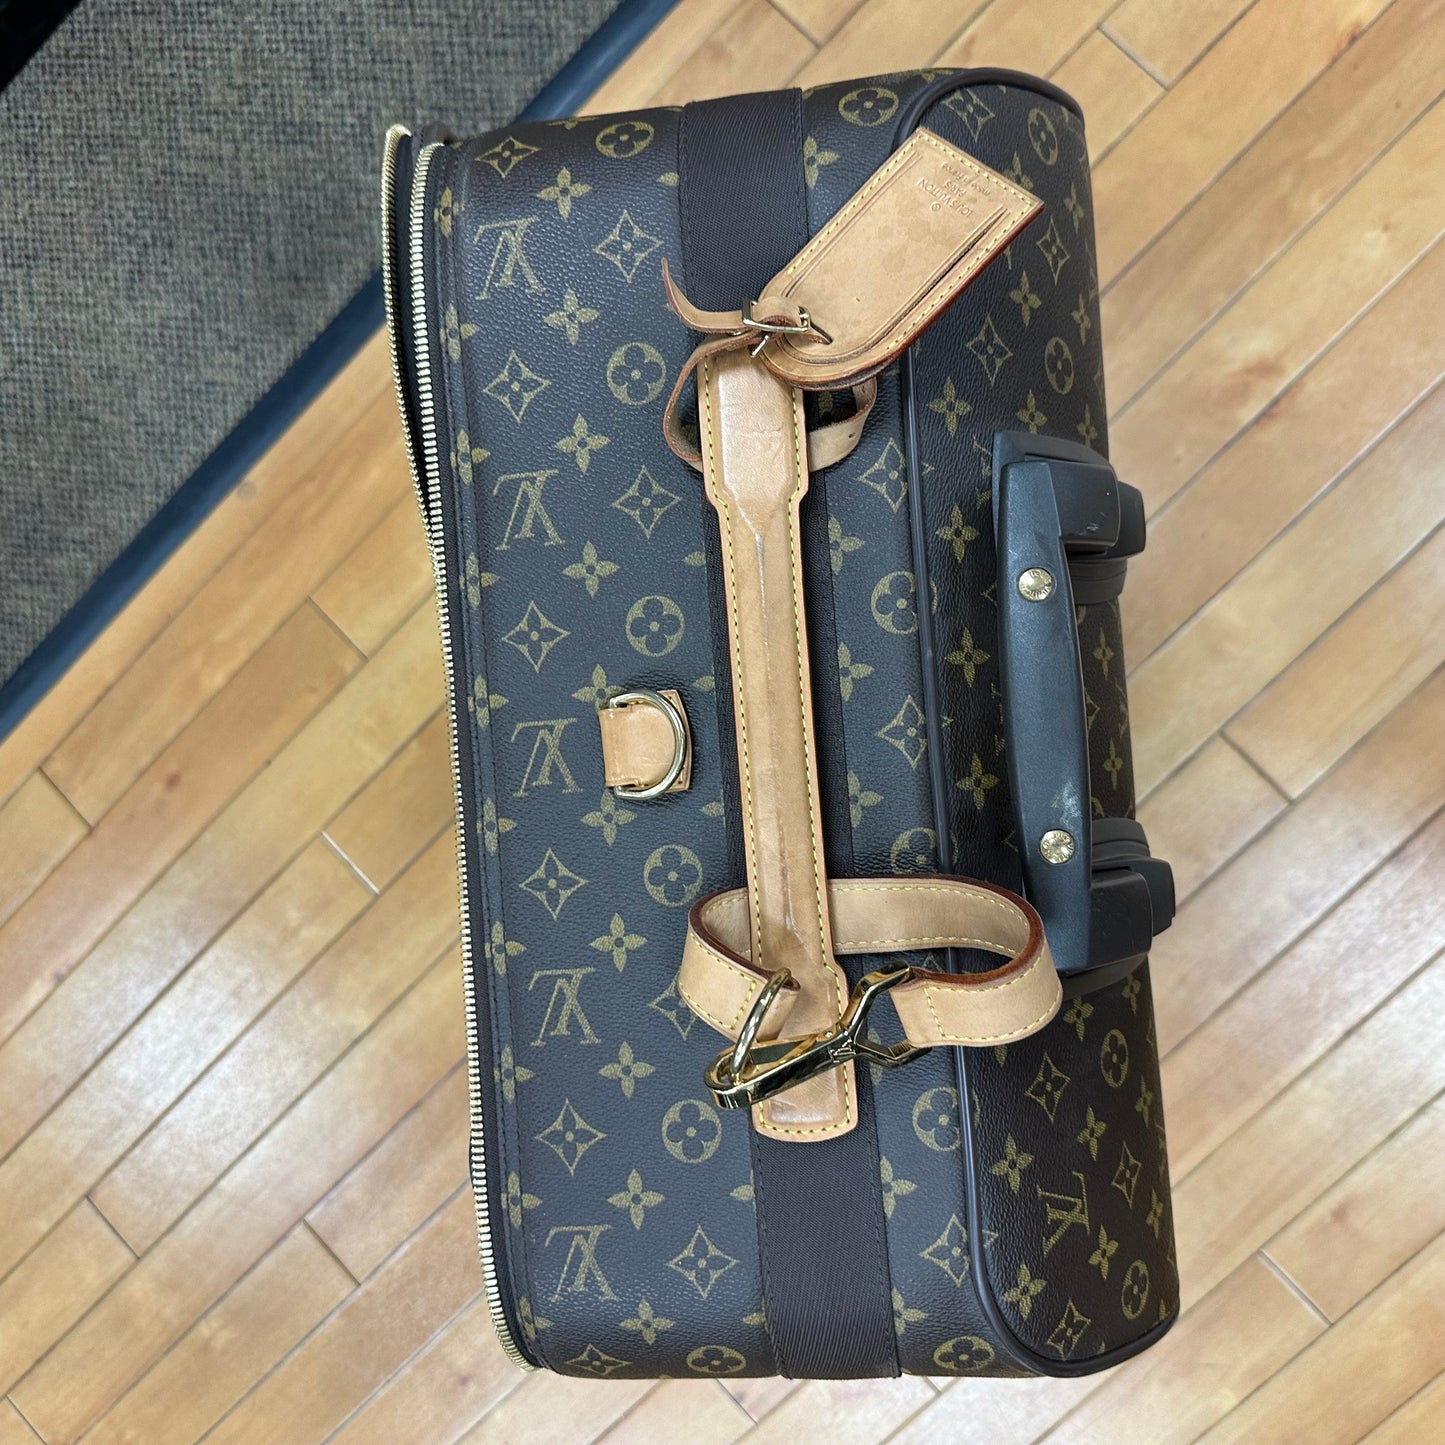 Luggage By Louis Vuitton  Size: Large